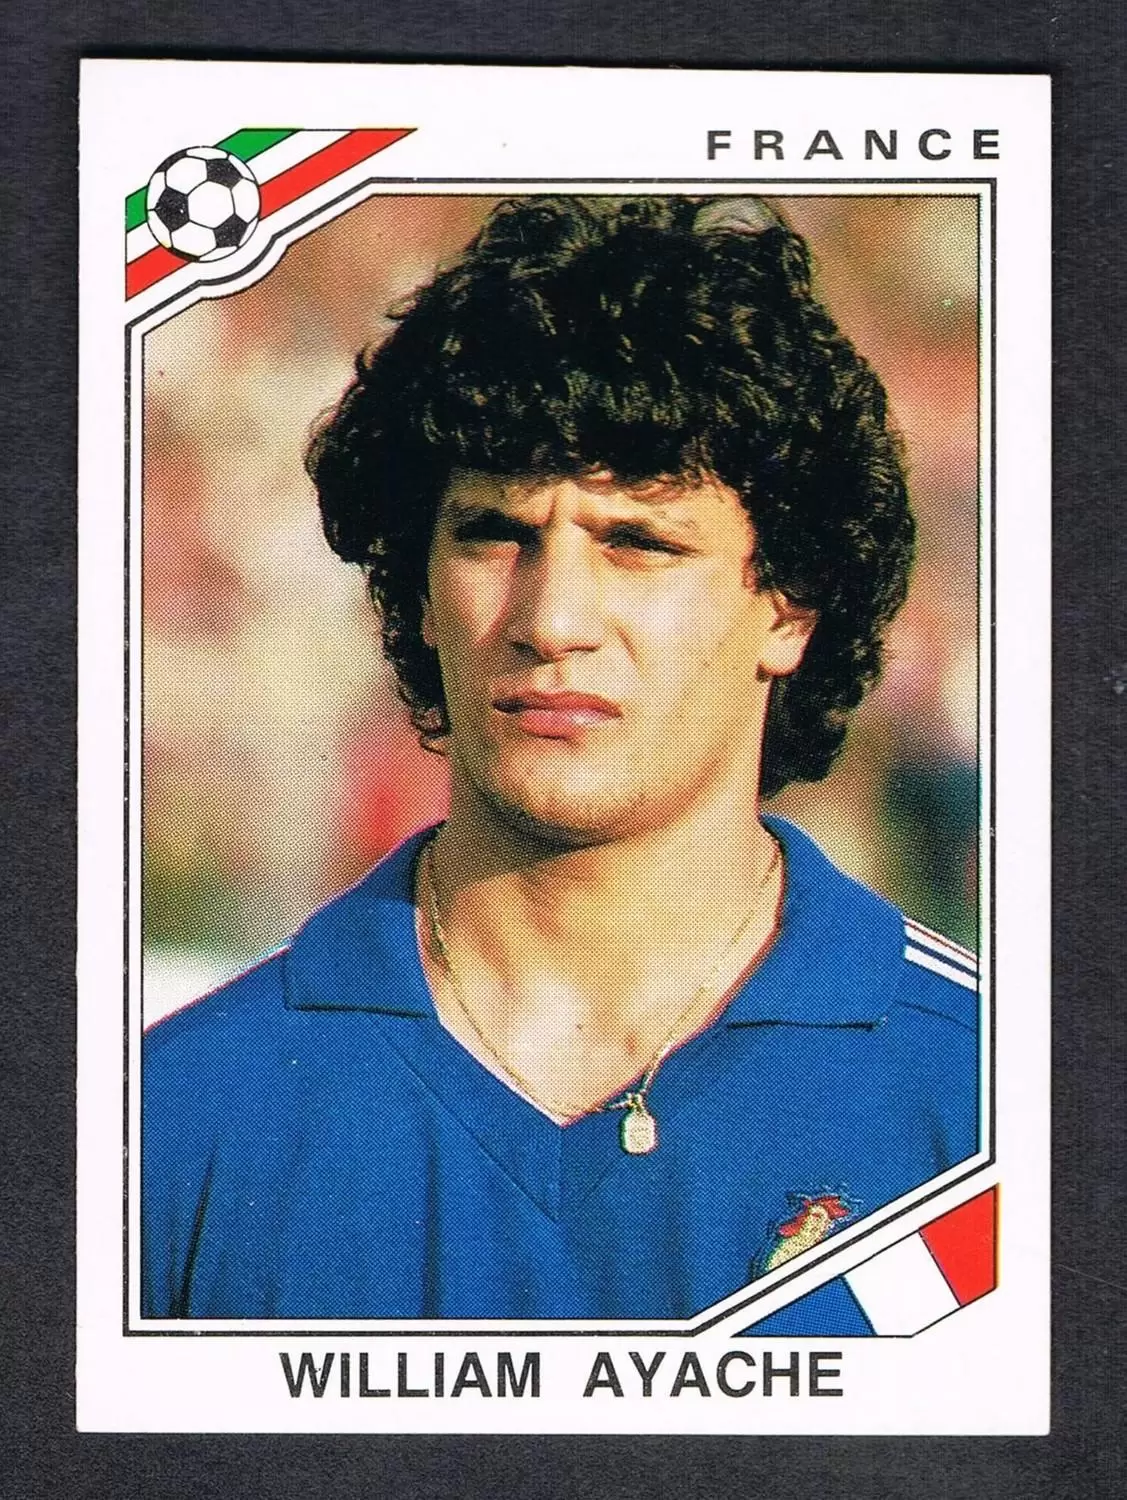 Mexico 86 World Cup - William Ayache  - France